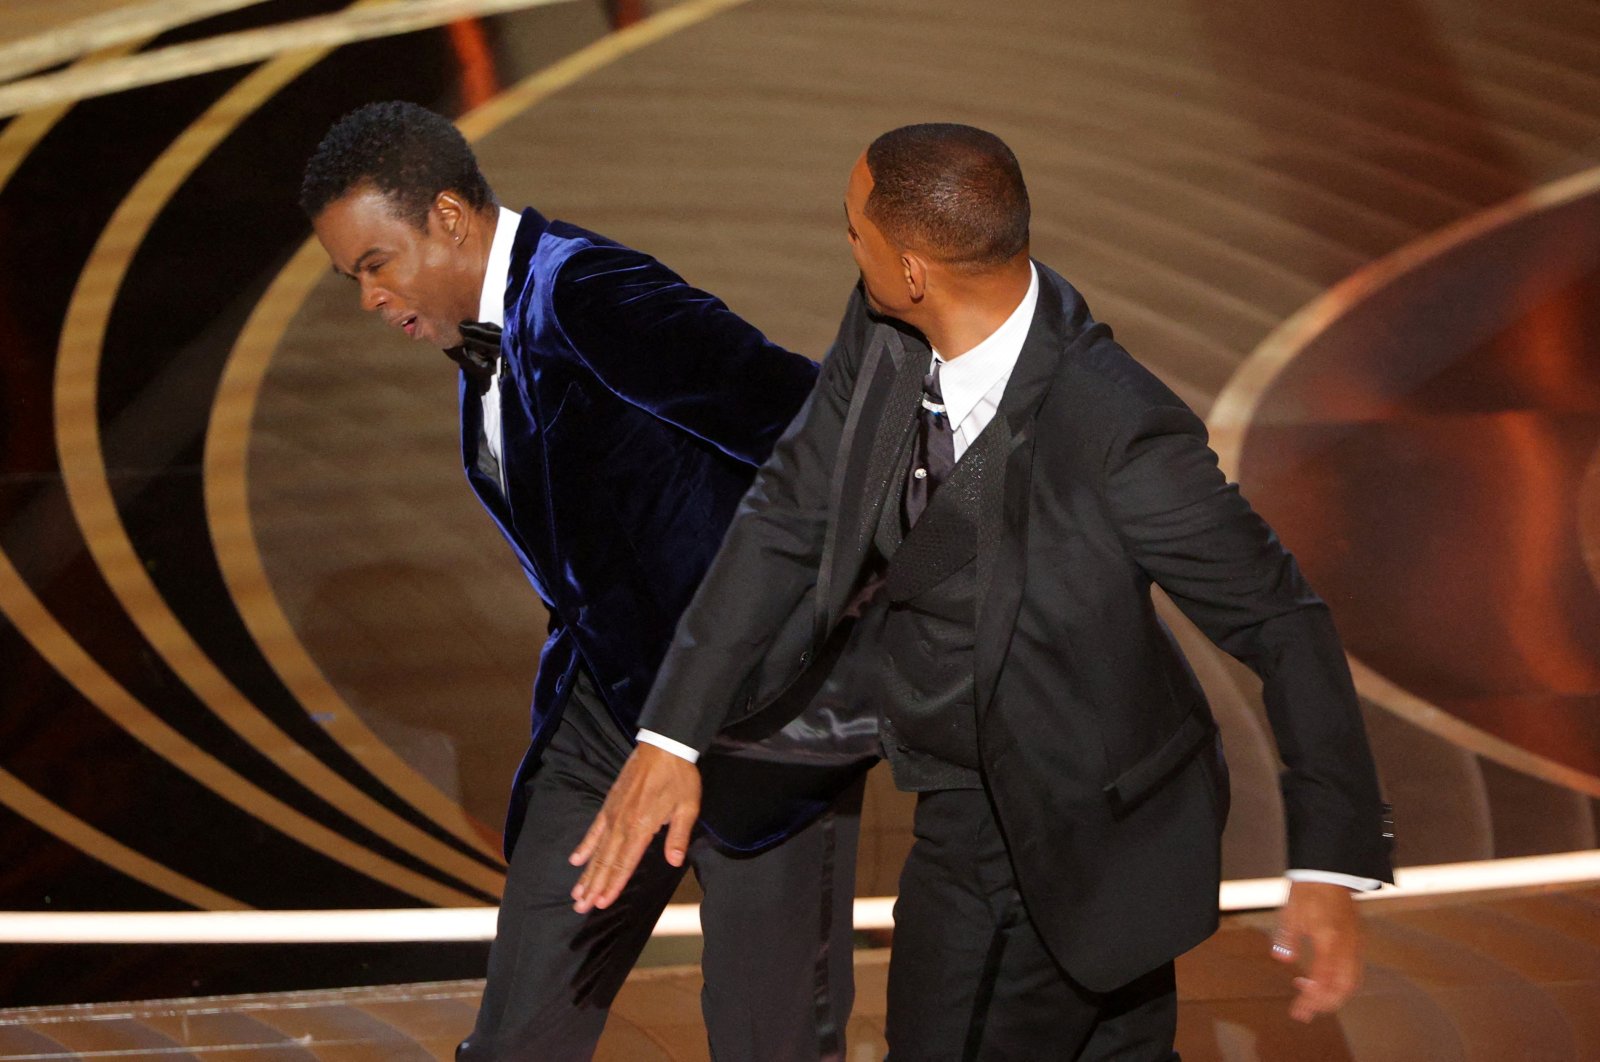 Will Smith (R) hits Chris Rock as Rock spoke on stage during the 94th Academy Awards in Hollywood, Los Angeles, California, U.S., March 27, 2022. (Reuters Photo)